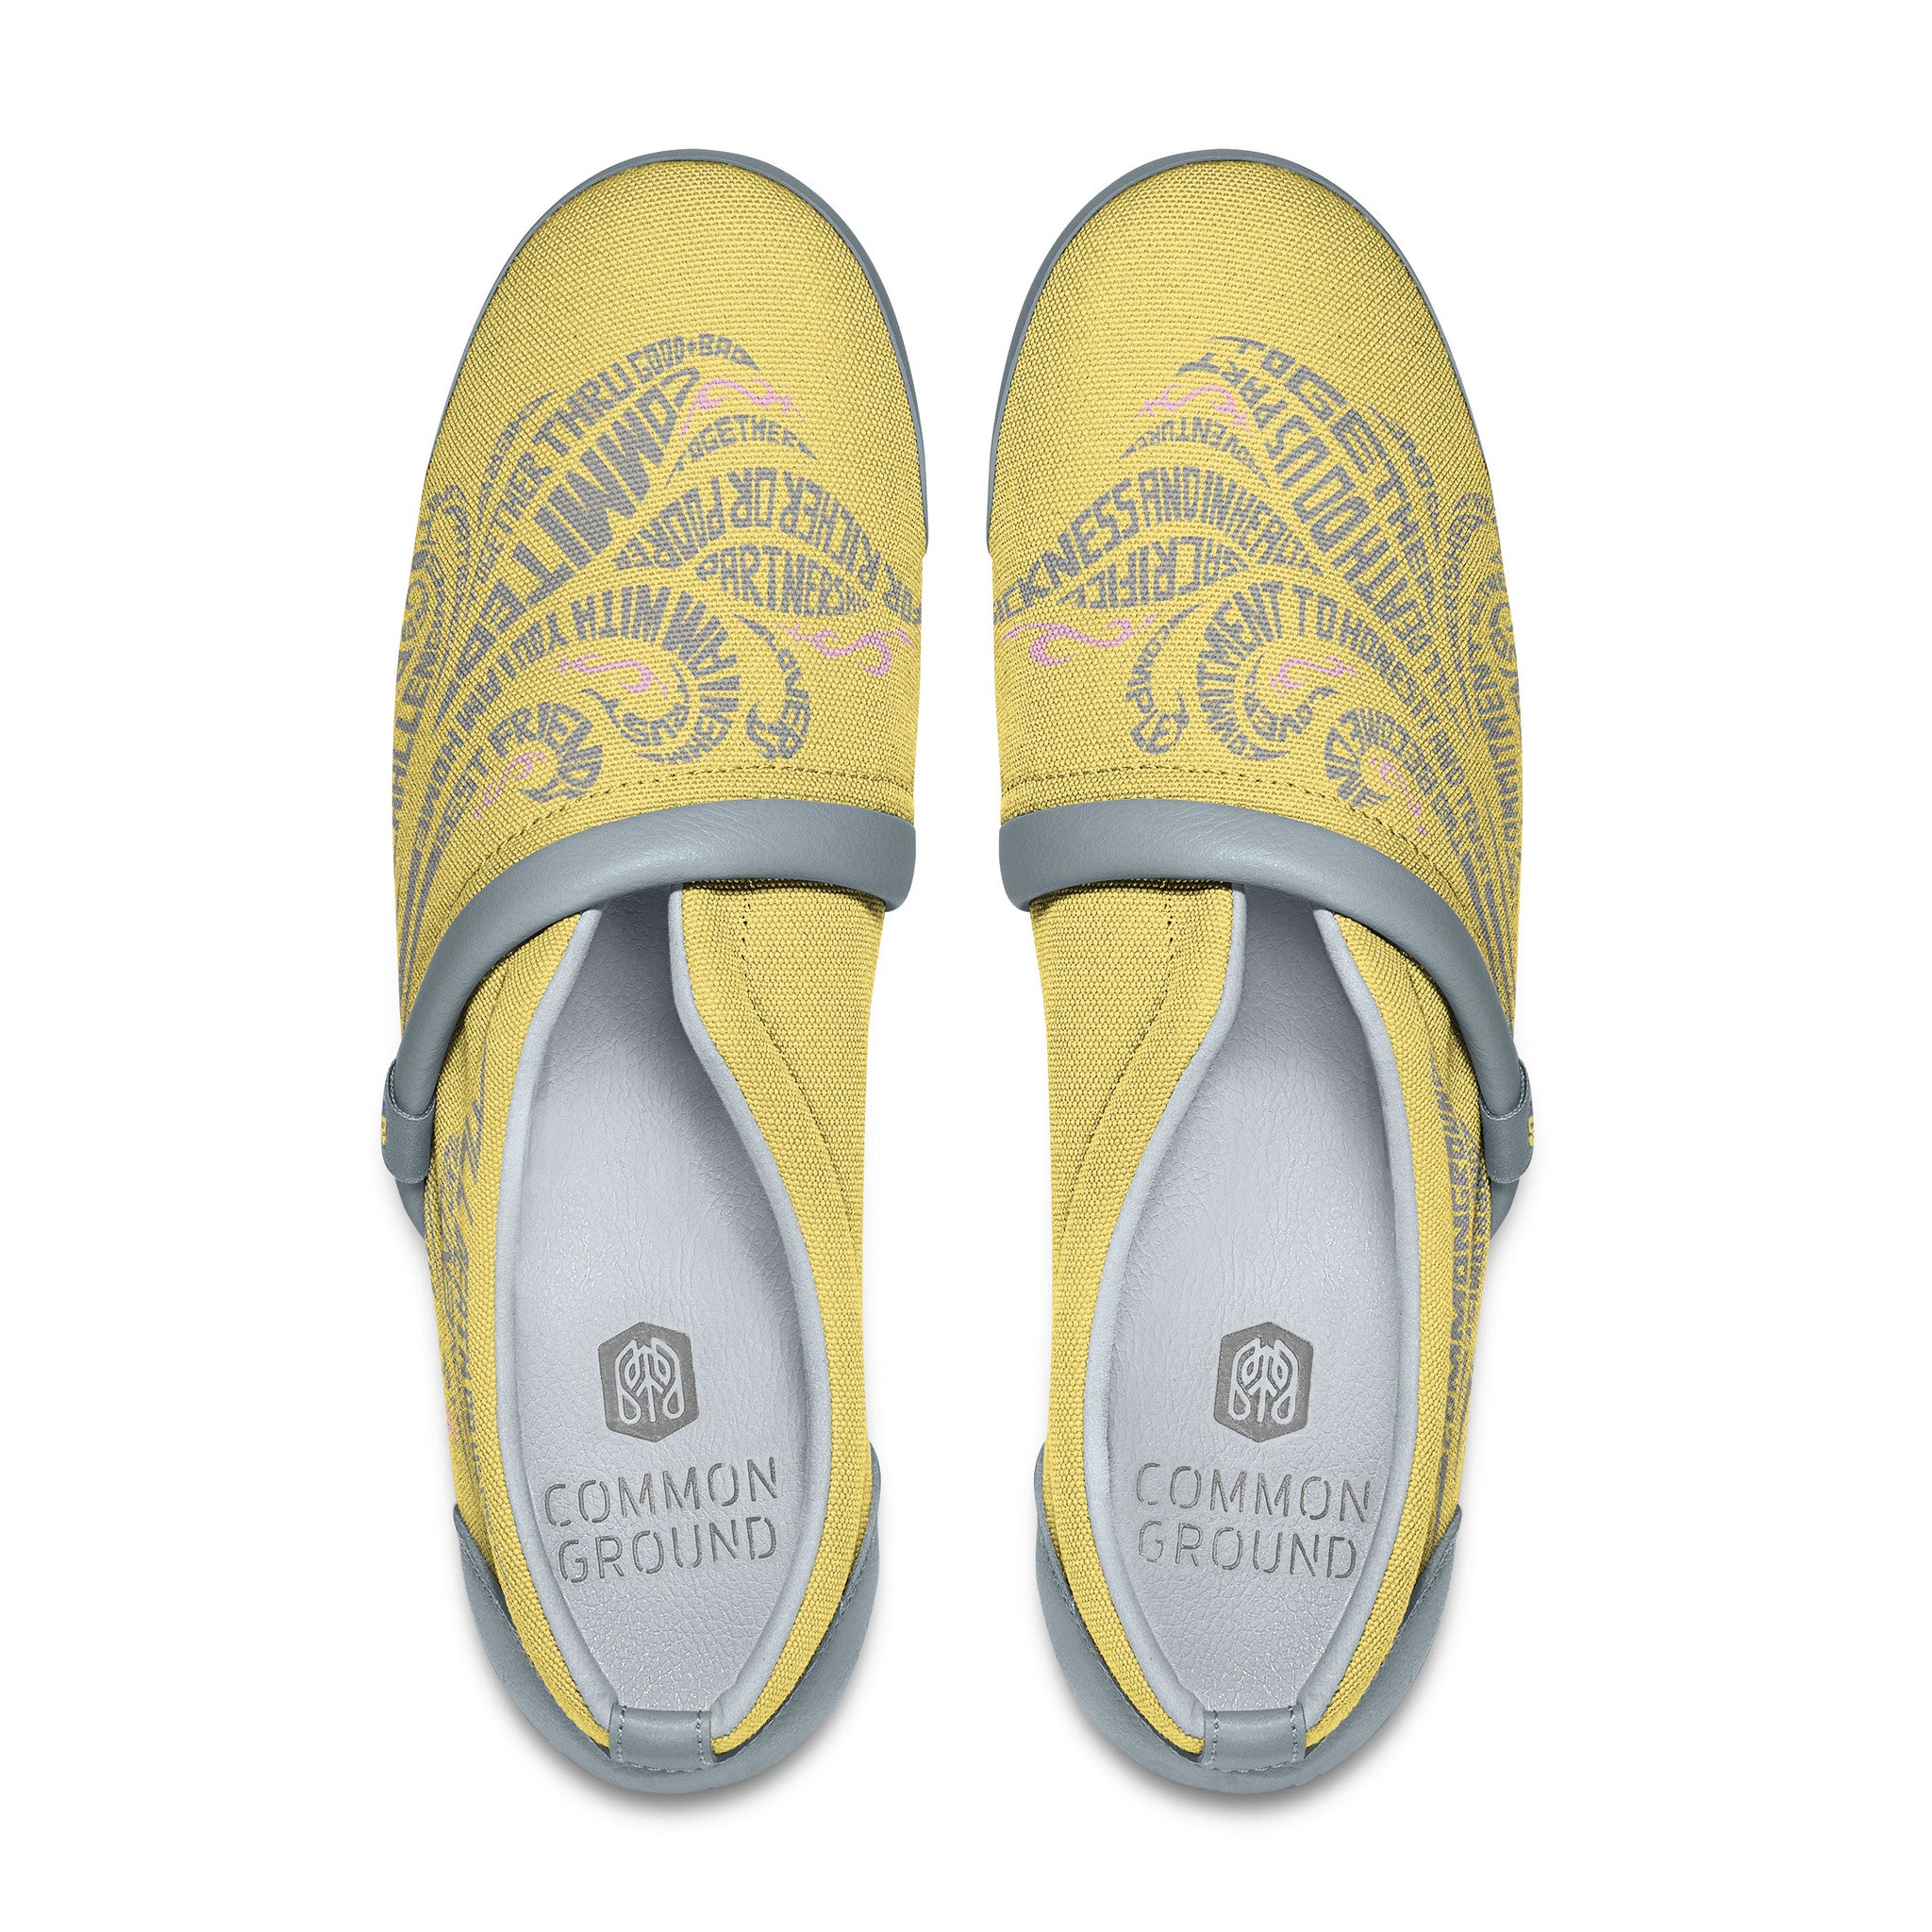 Goldfinch - Common Ground Footwear Shoes Top View